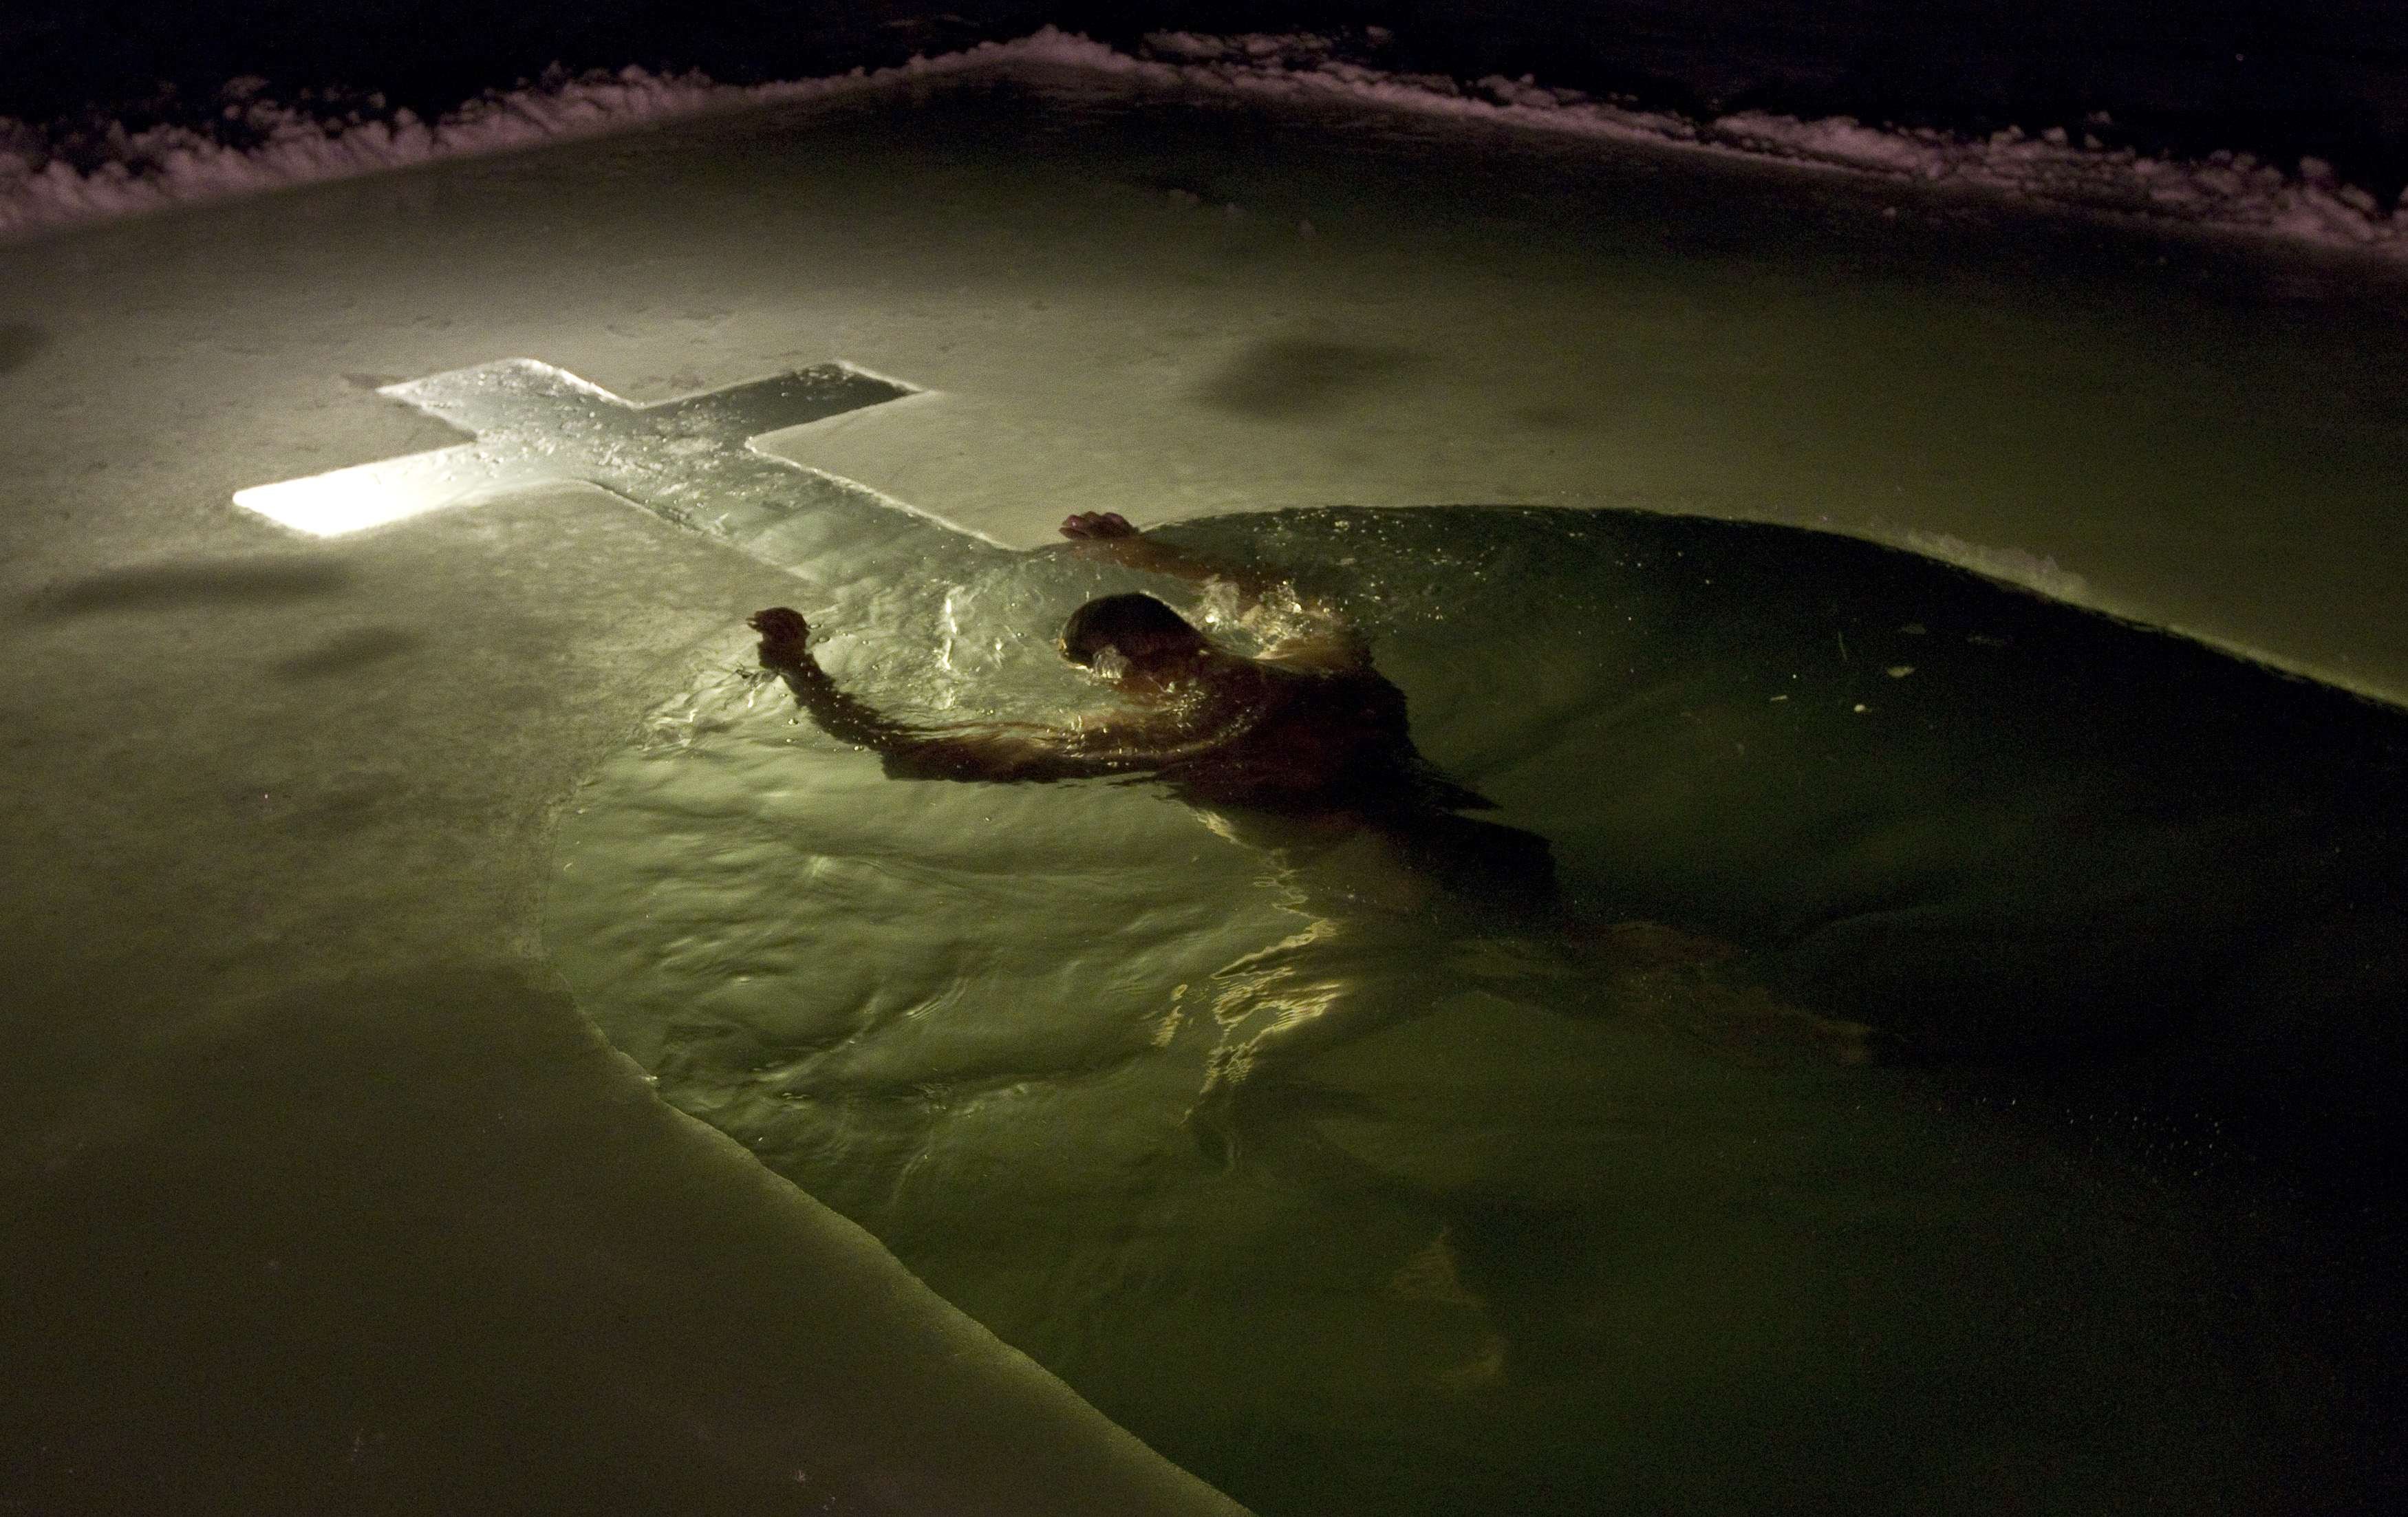 A man swims in a lake in Minsk, Jan. 18, 2014. Orthodox believers mark Epiphany by immersing themselves in icy waters regardless of the weather.